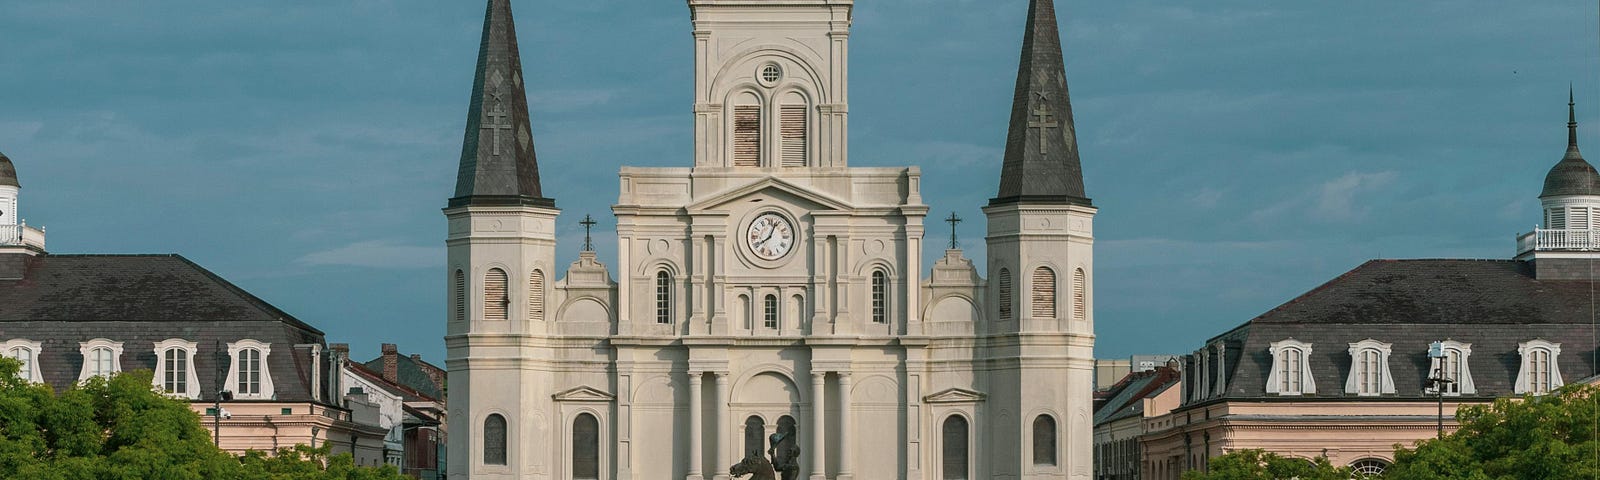 St. Louis Cathedral overlooking Jackson Square in New Orleans, Louisiana